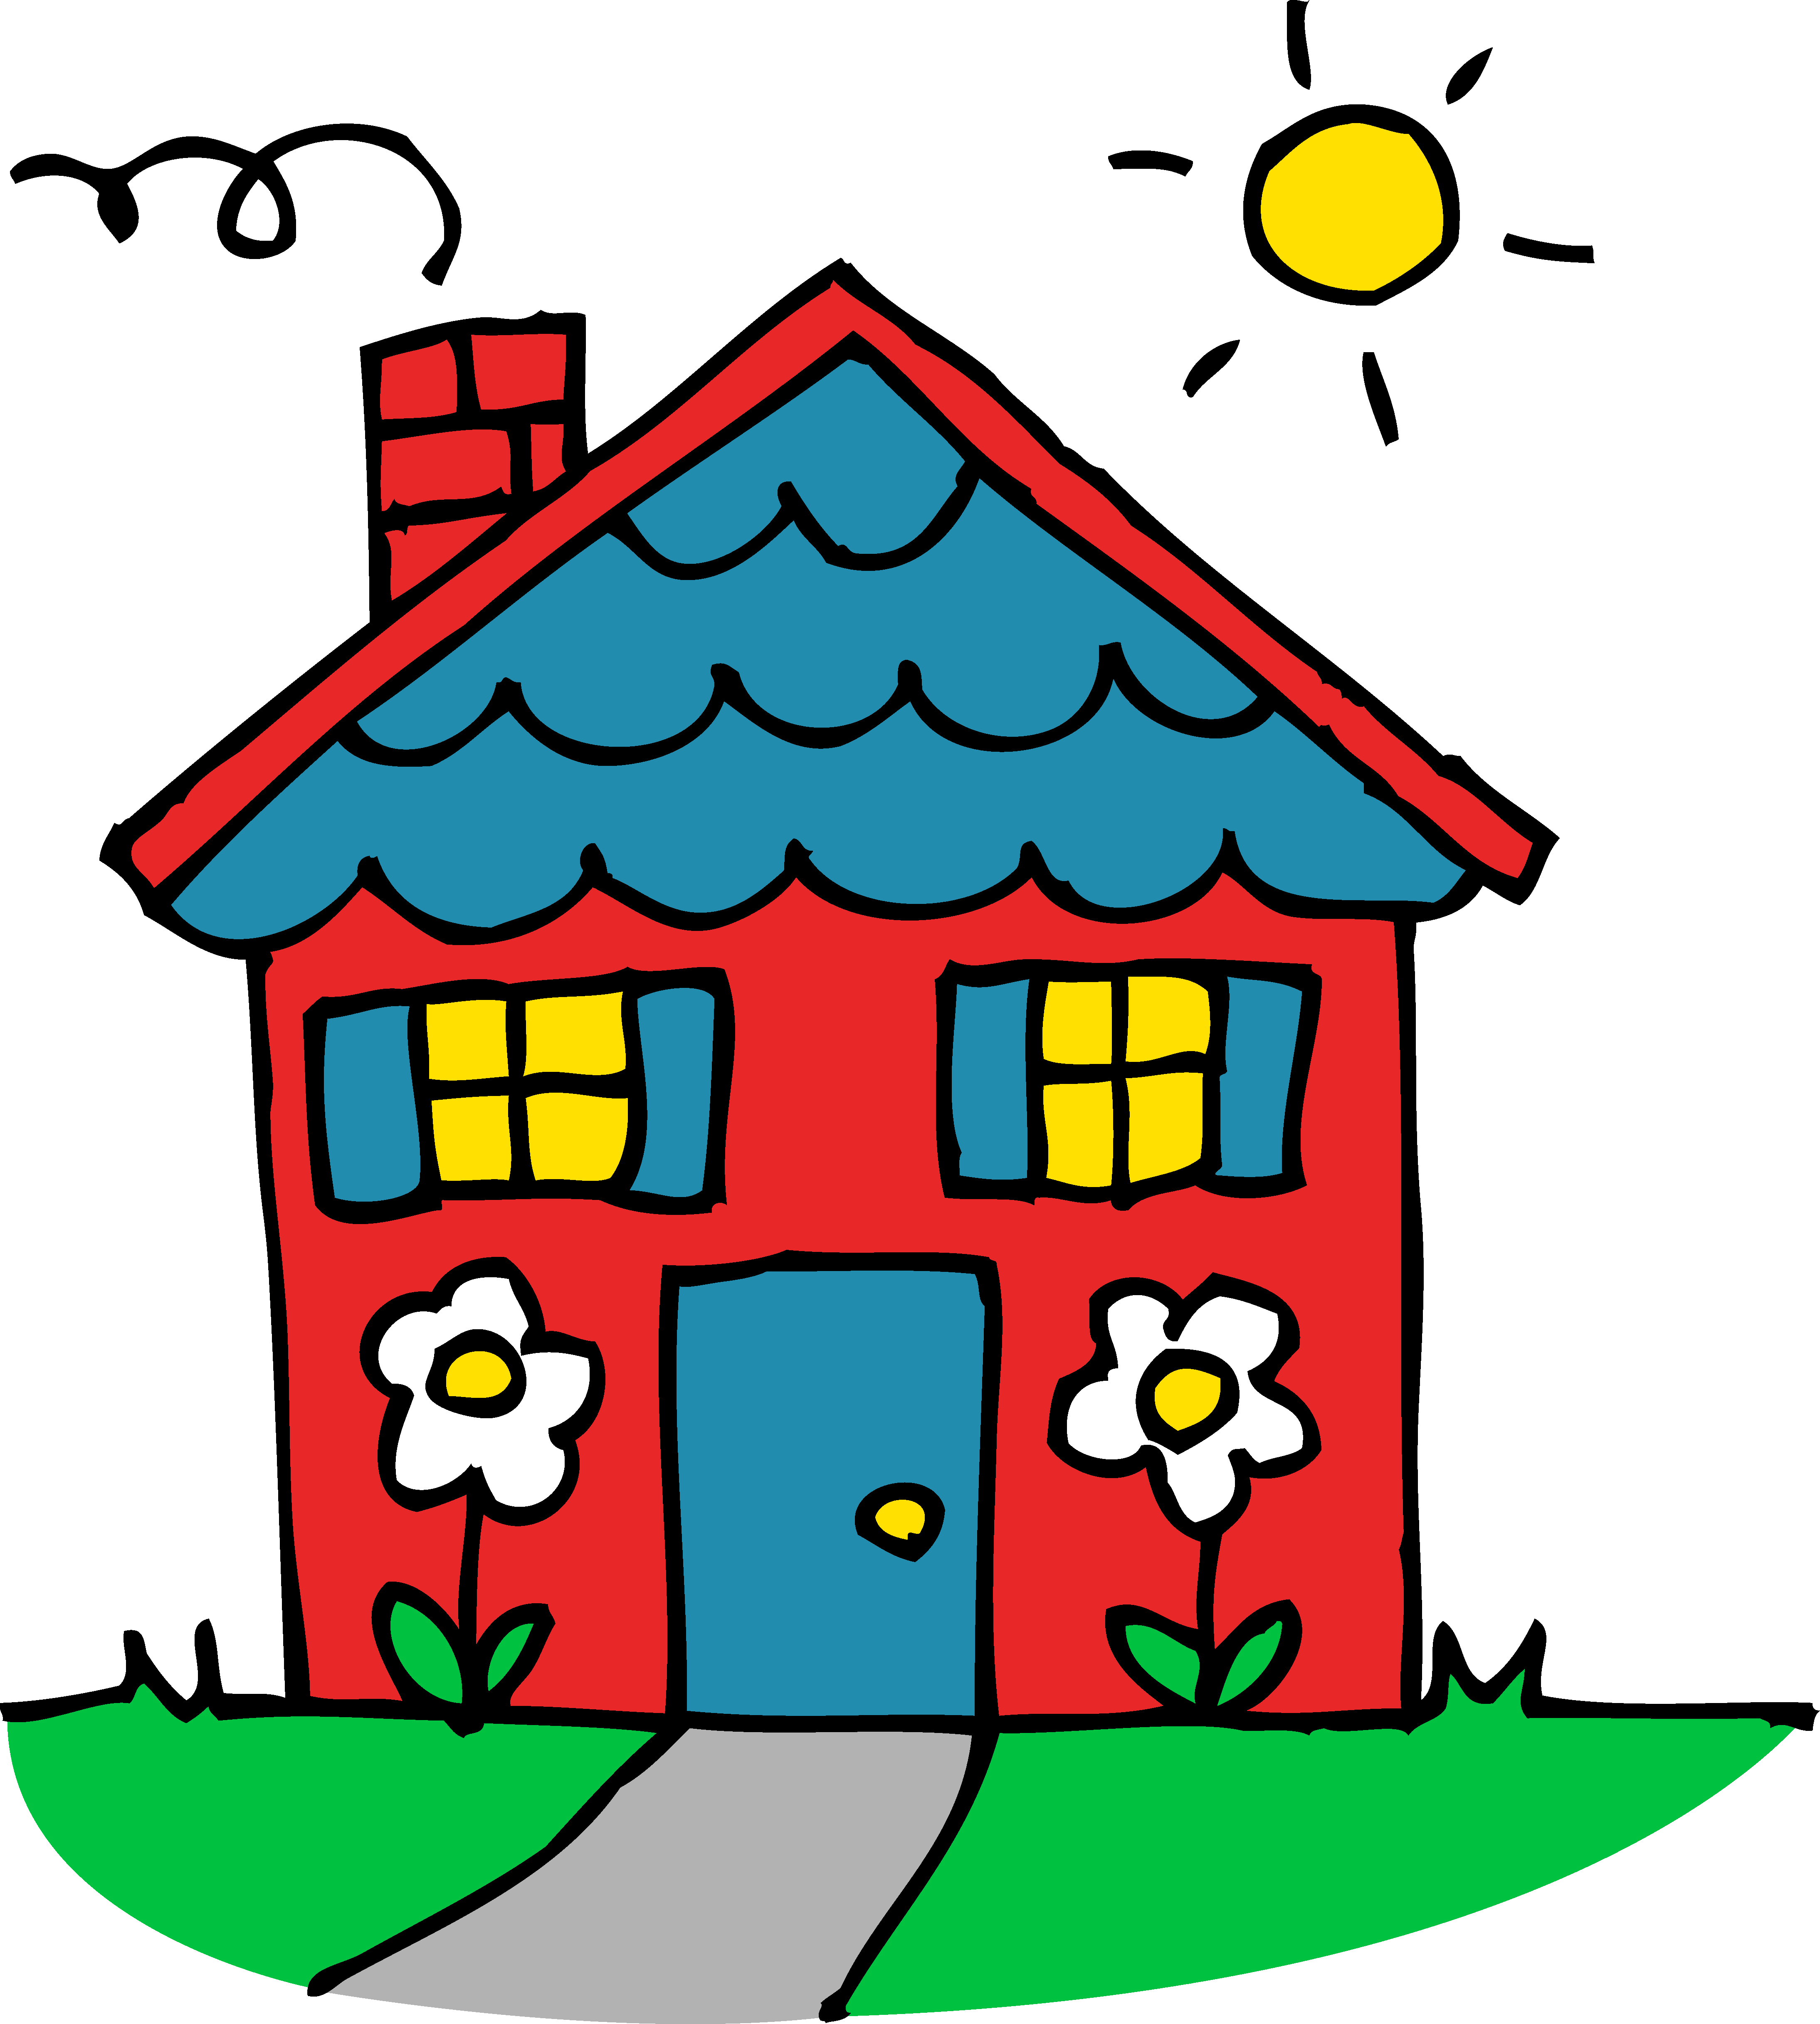 House For Sale Clip Art | Clipart library - Free Clipart Images